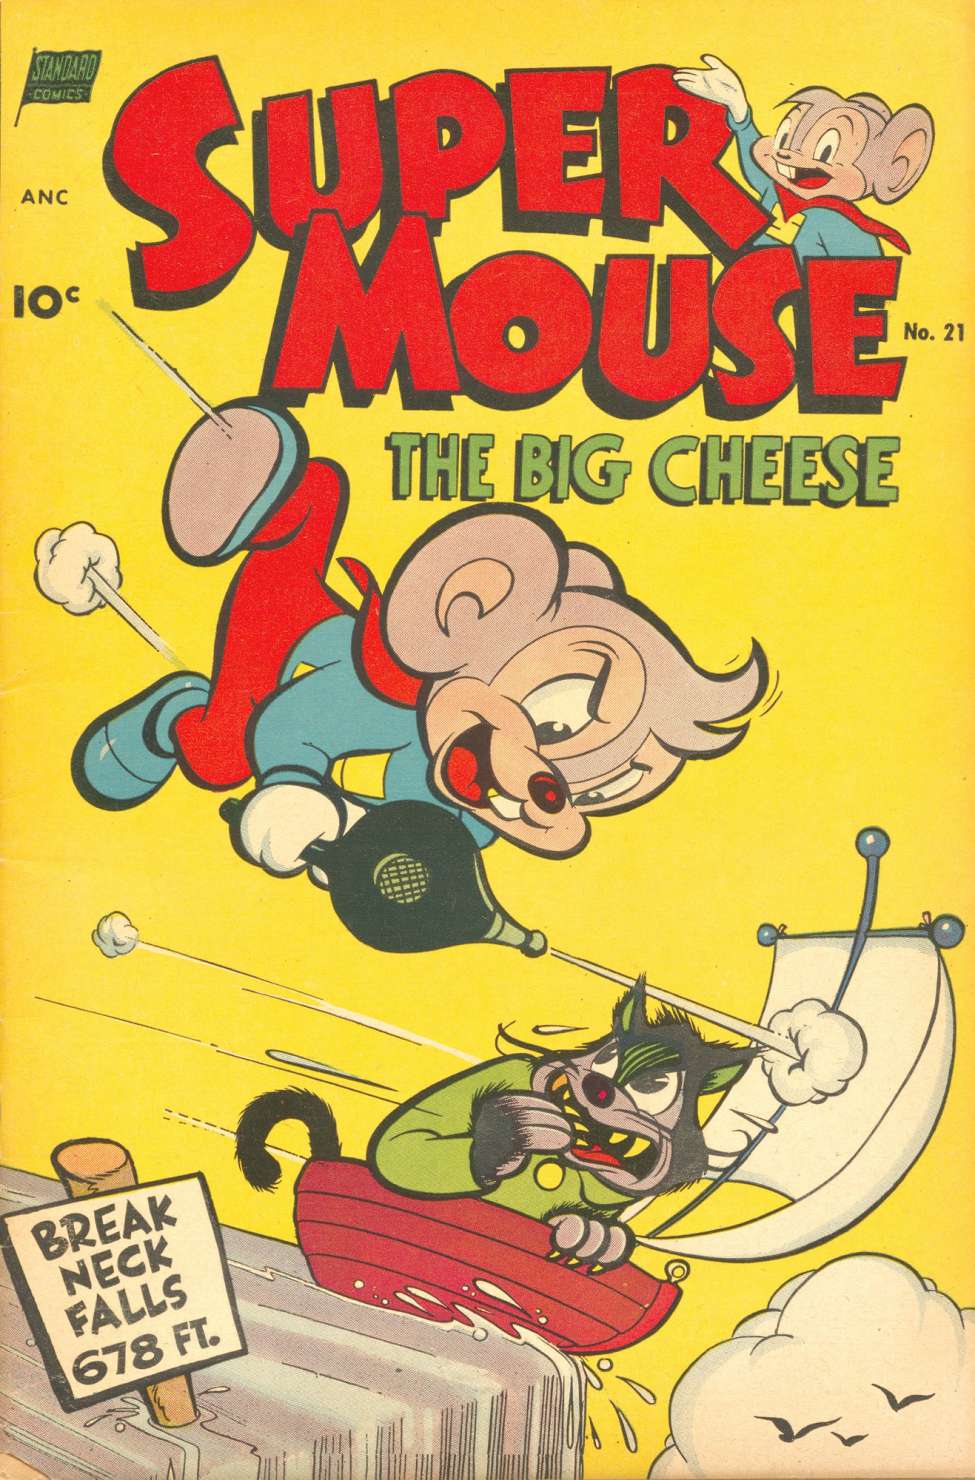 Book Cover For Supermouse 21 - Version 2